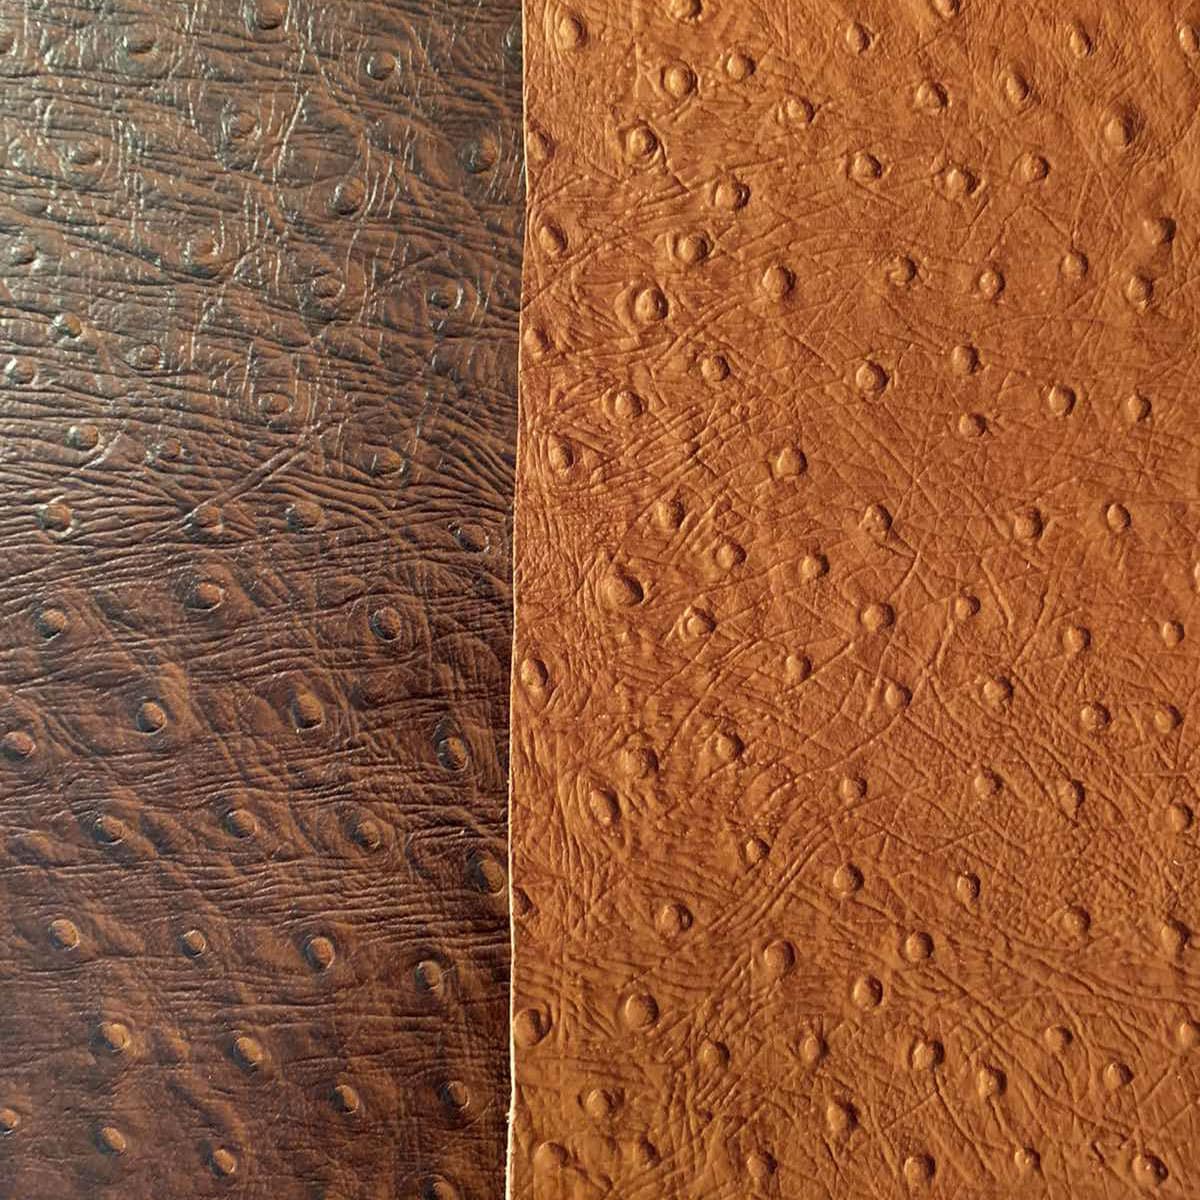 Ostrich Leather Dark Brown Vinyl Faux Leather Upholstery Fabric for Hand Crafts DIY Tooling Sewing Hobby Workshop Crafting Wallet Making Square